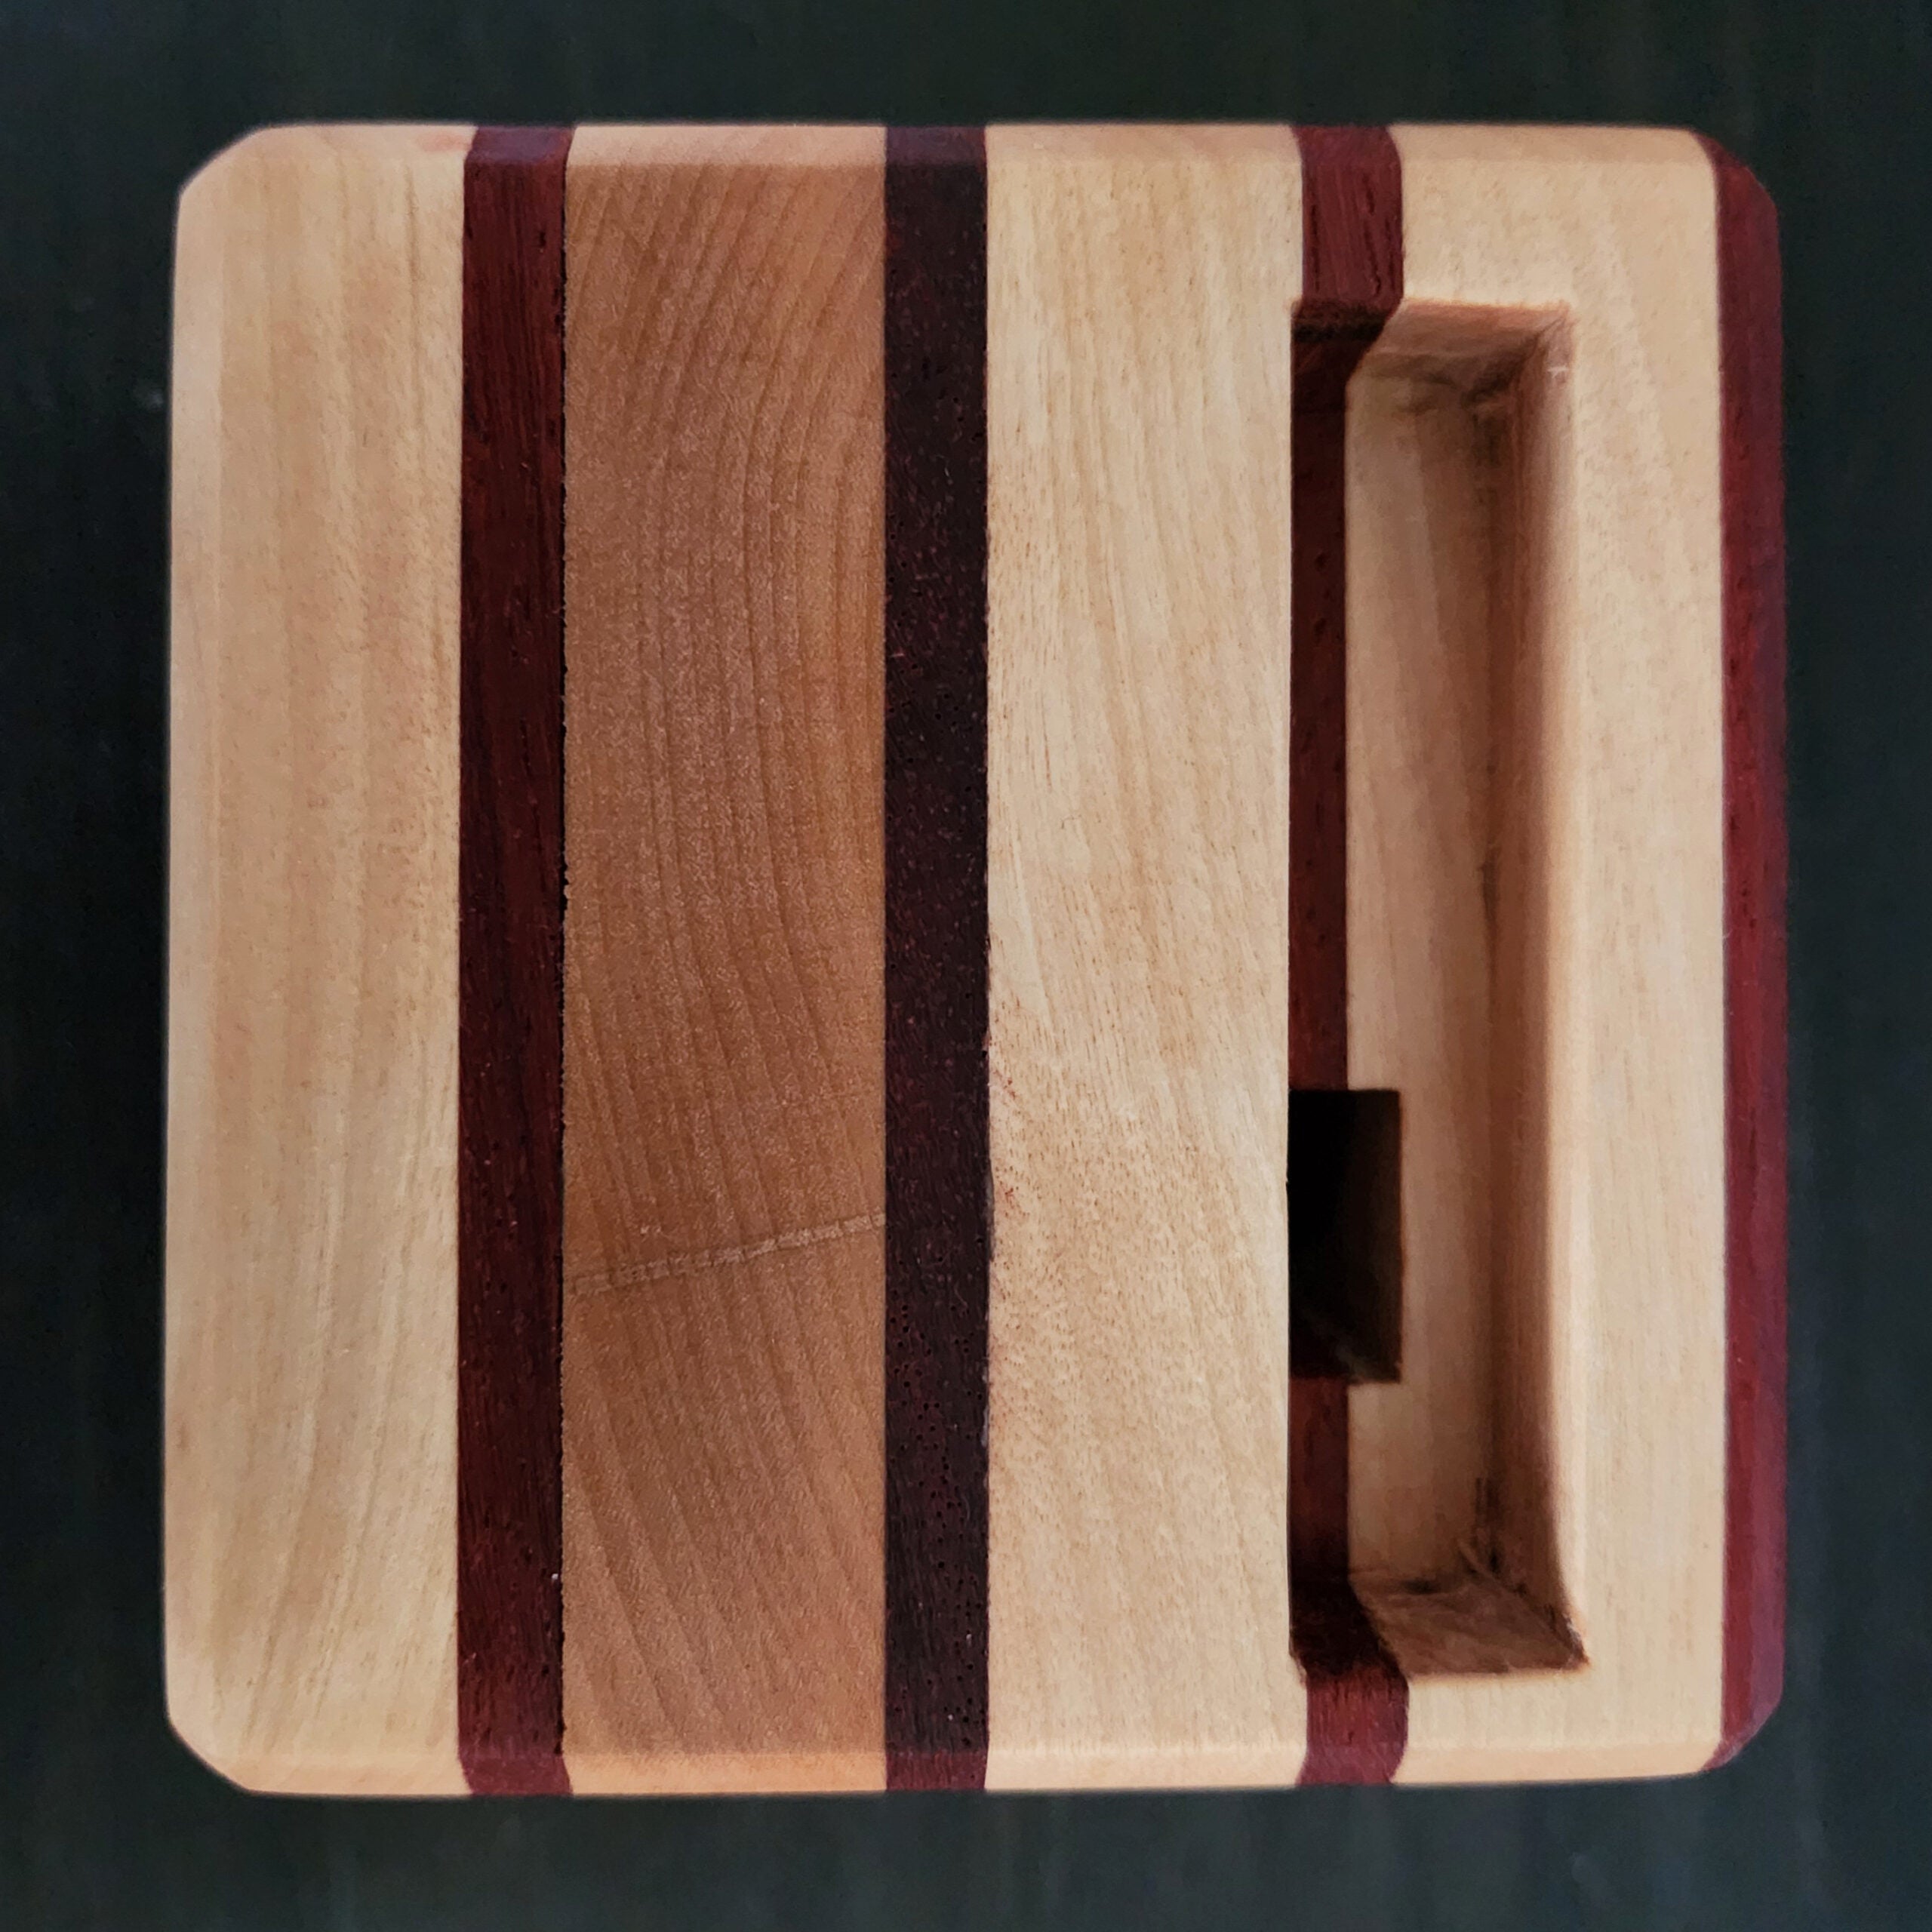 A top-down view of a passive wooden phone amplifier, showing the slot for the phone and the hole that sends the audio into the main speaker cavity.